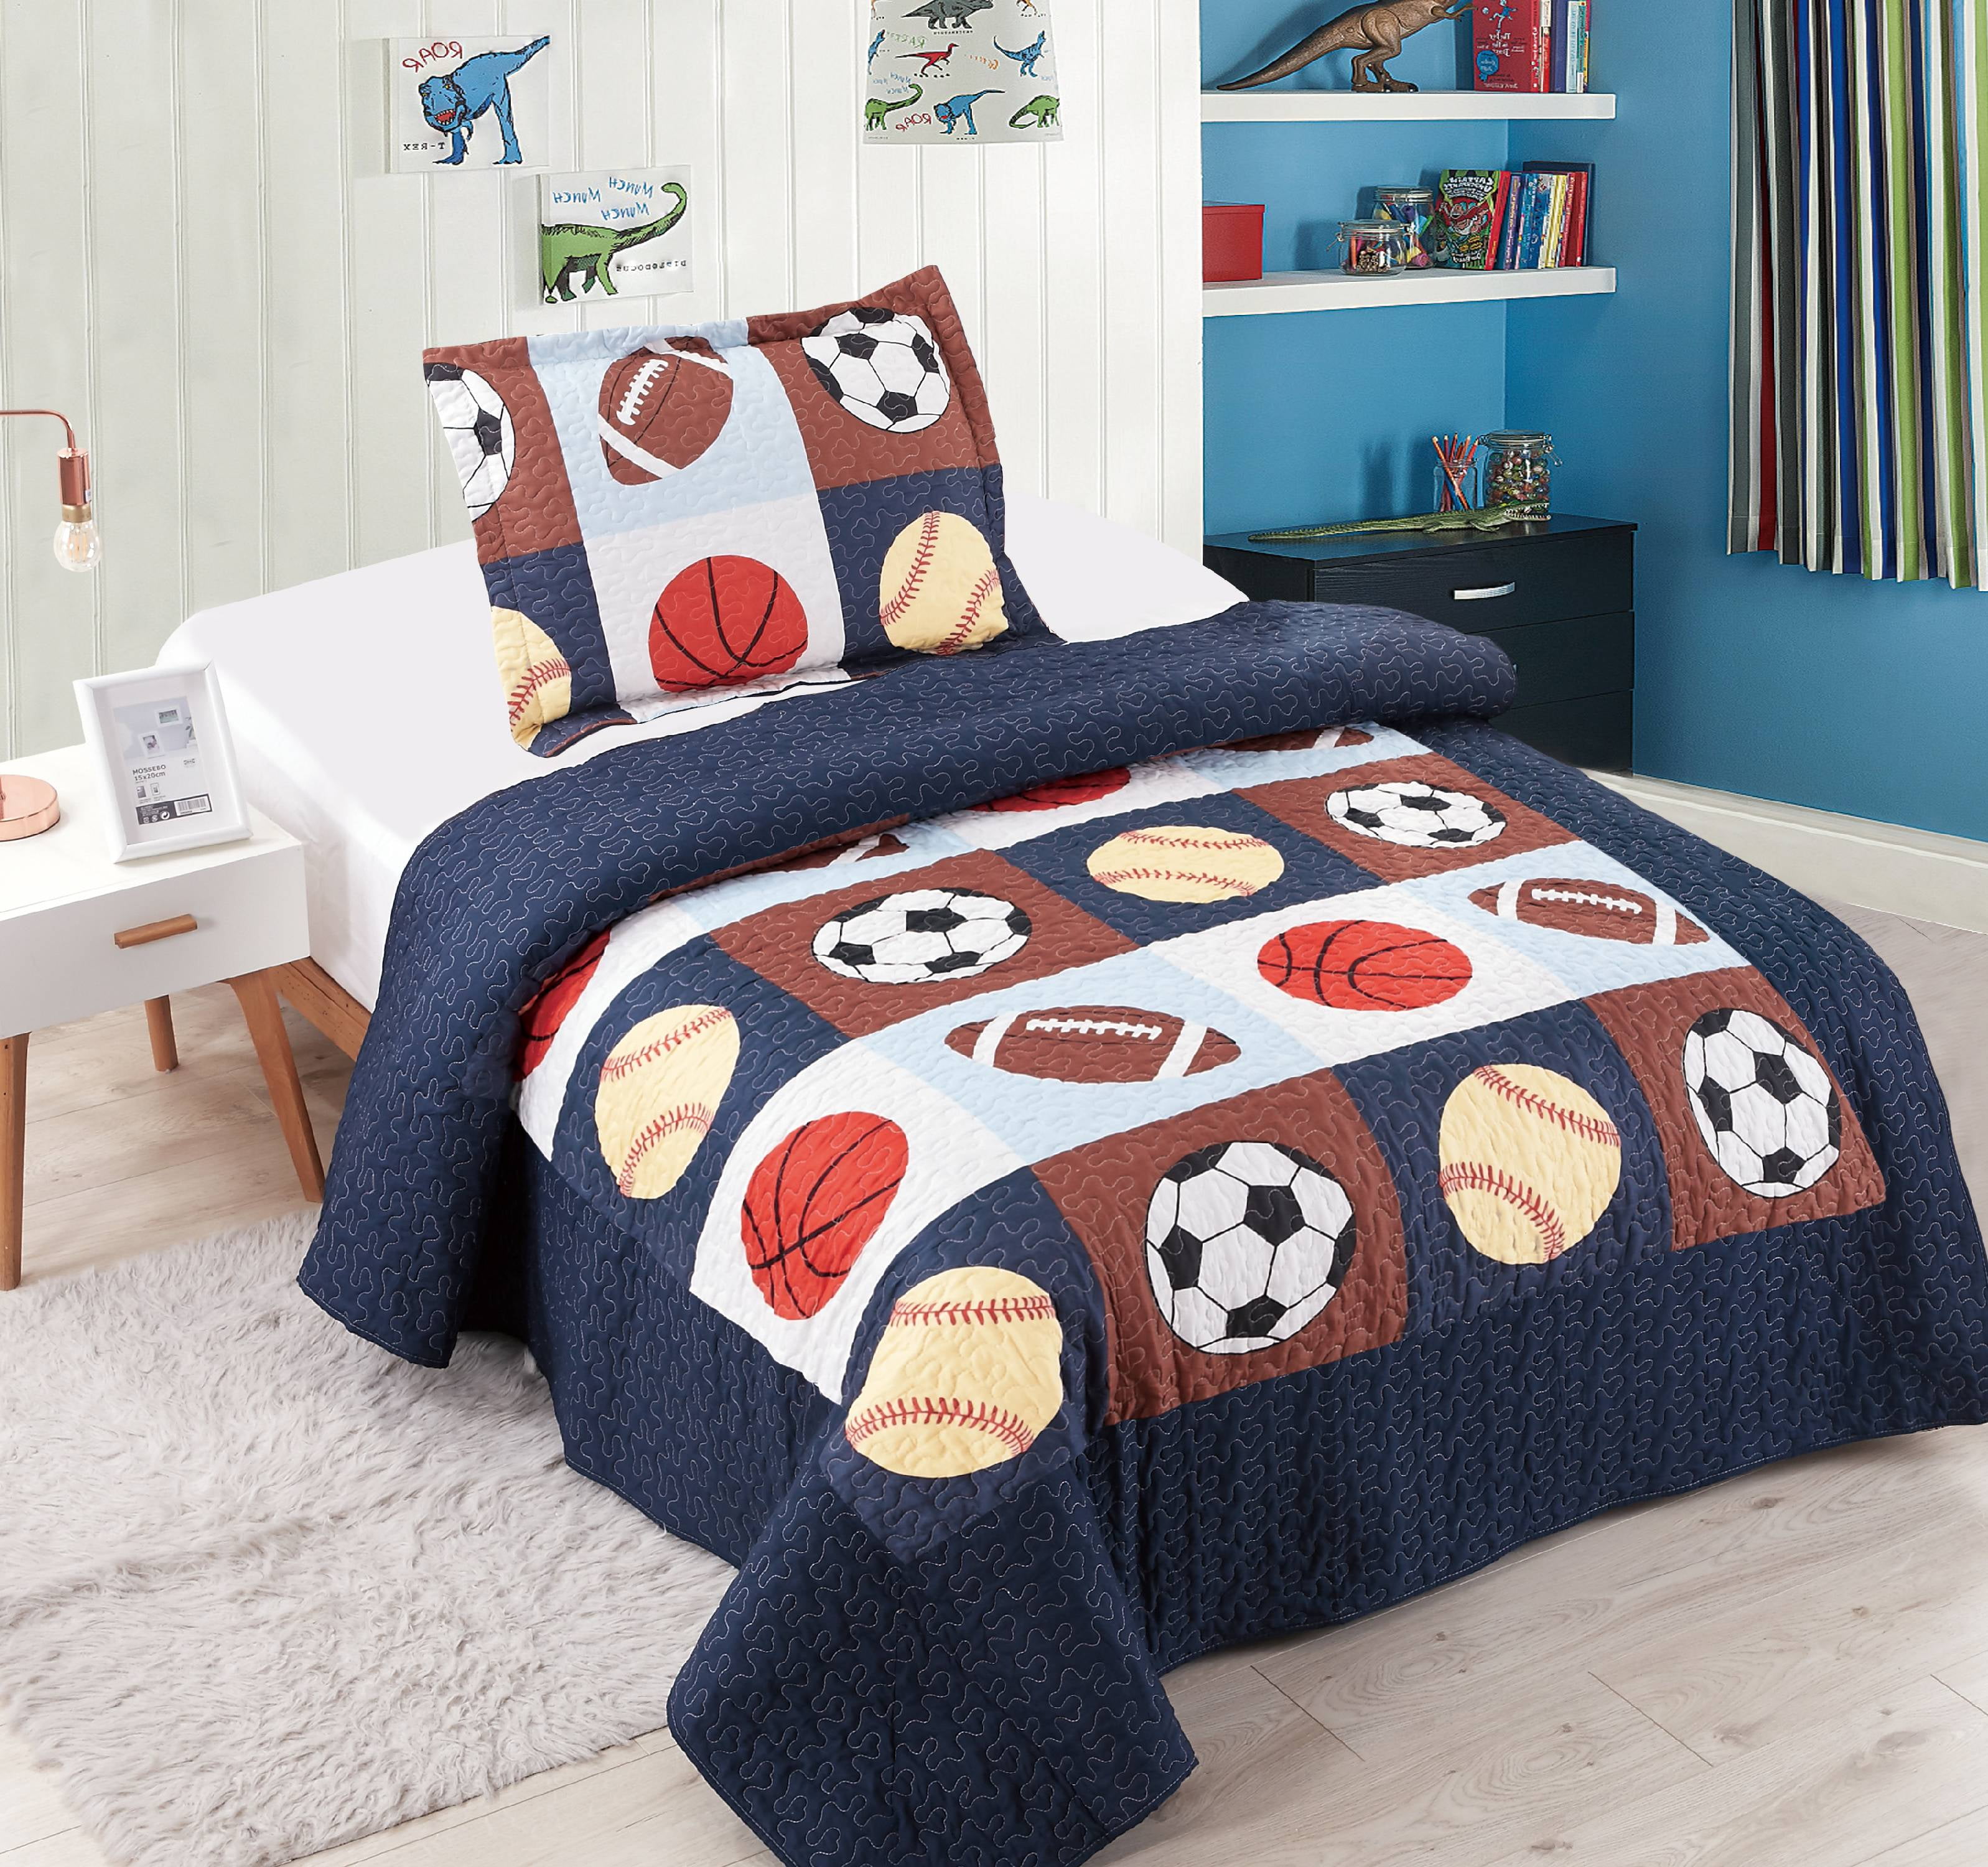 Elegant Home Multicolor Patchwork Sports Basketball Football Baseball Design 4 Piece Printed Full Size Sheet Set with Pillowcase Flat Fitted Sheet for Boys Kids/ Teens # Patchwork Full